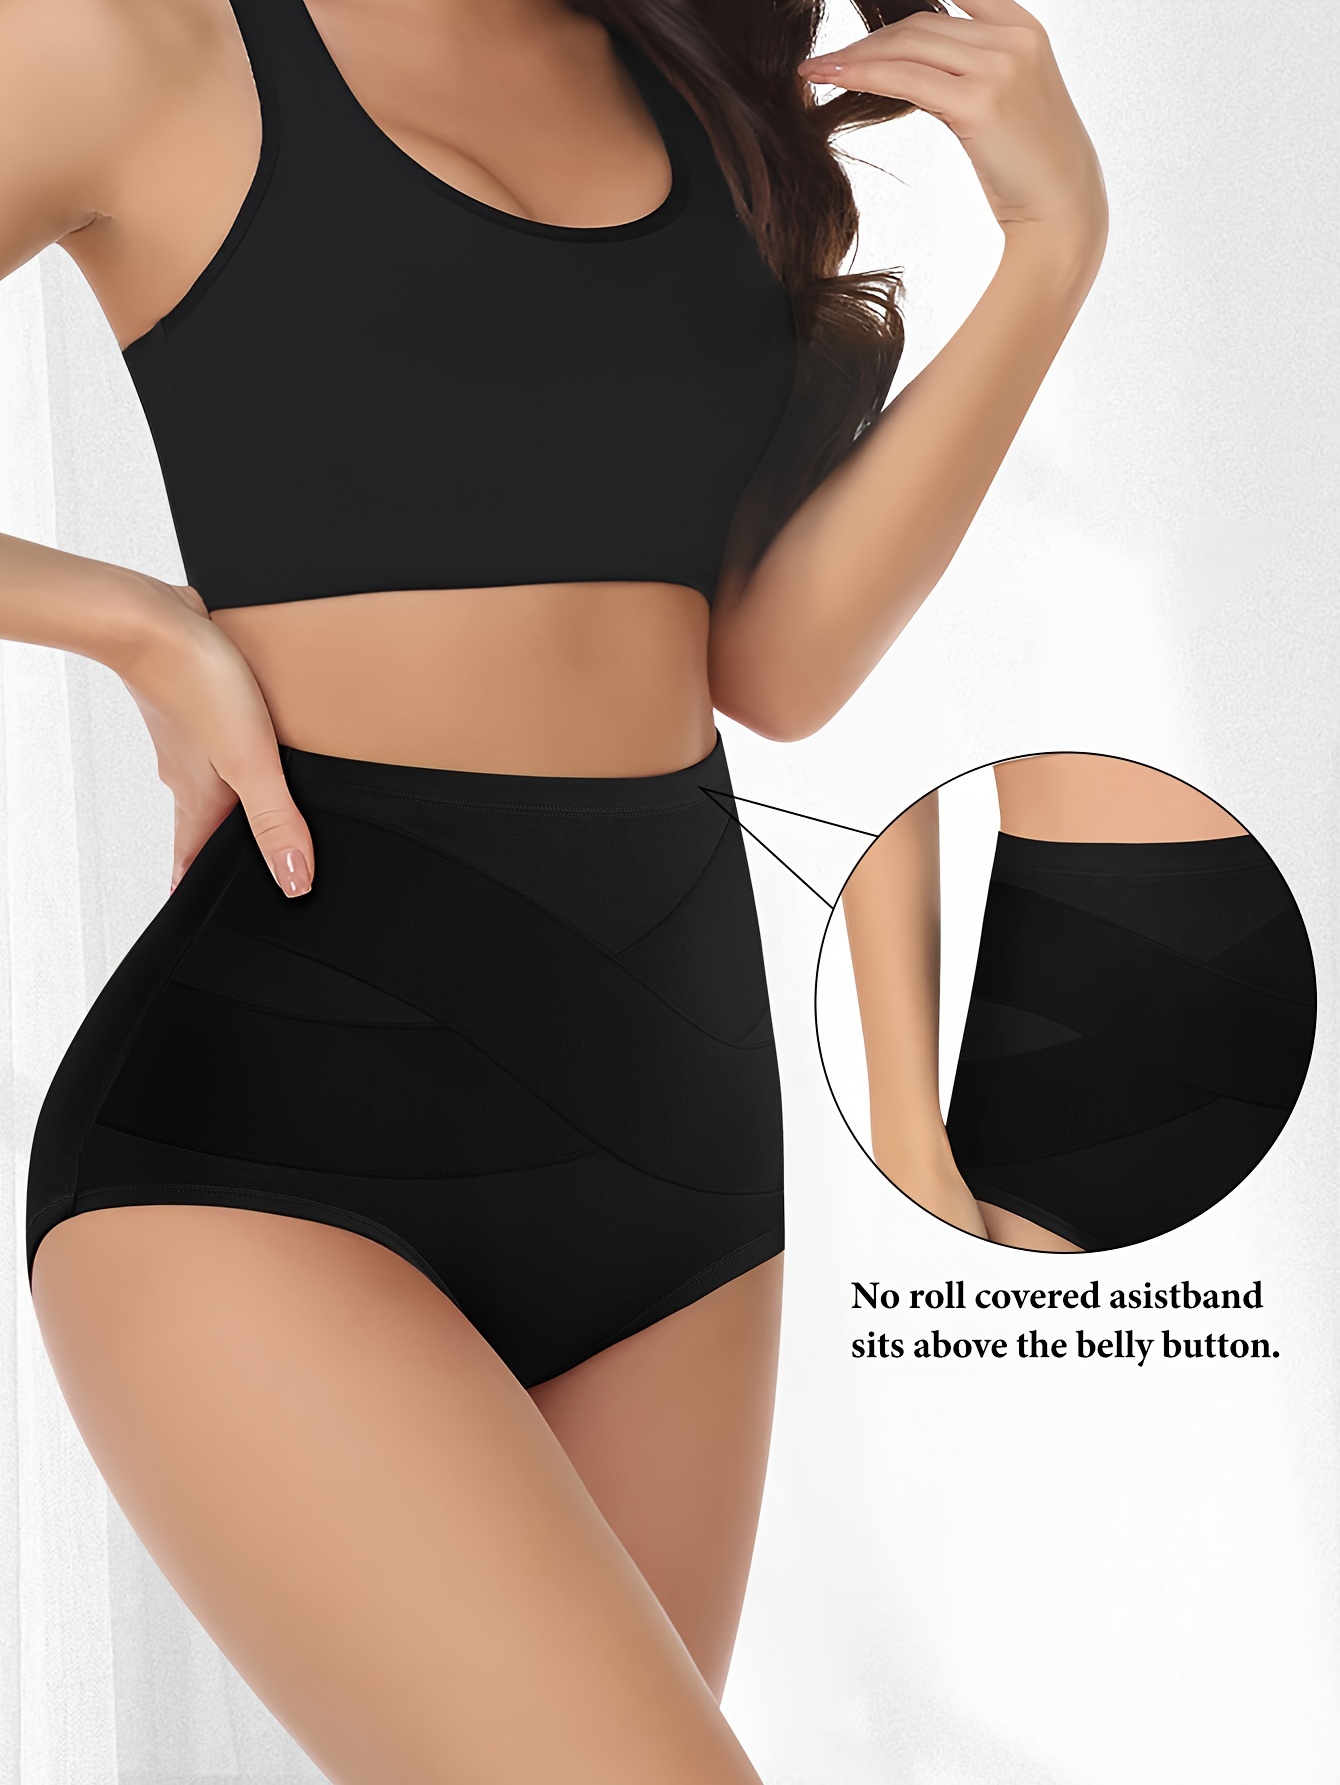 nsendm Female Underpants Adult Cute Cotton Underwear for Women Large Size  High Waist Seamless Ice Silk Shaping Pants for Women Active Wear